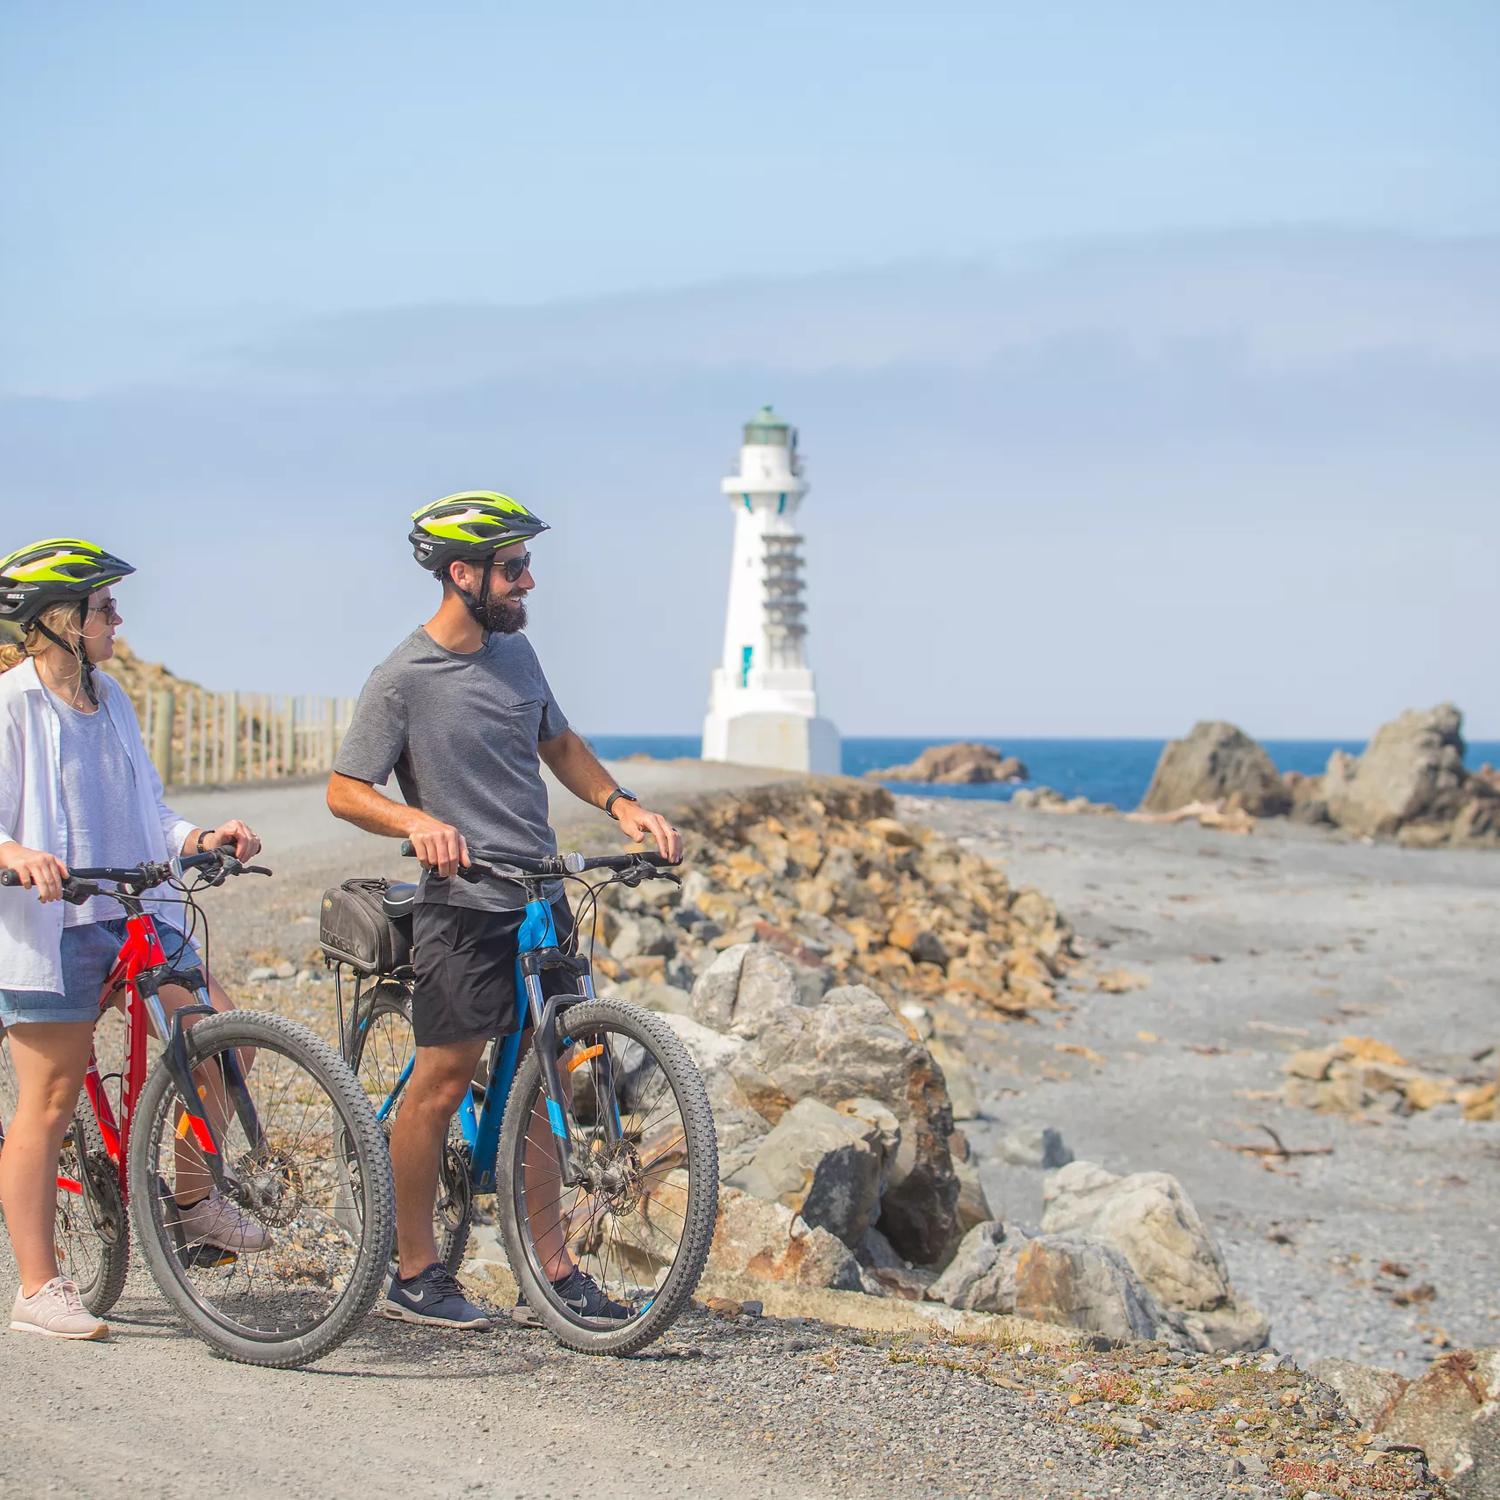 2 people standing still with their bikes and helmets on, staring out into the ocean. The Pencarrow light house and large rocks can be seen behind them